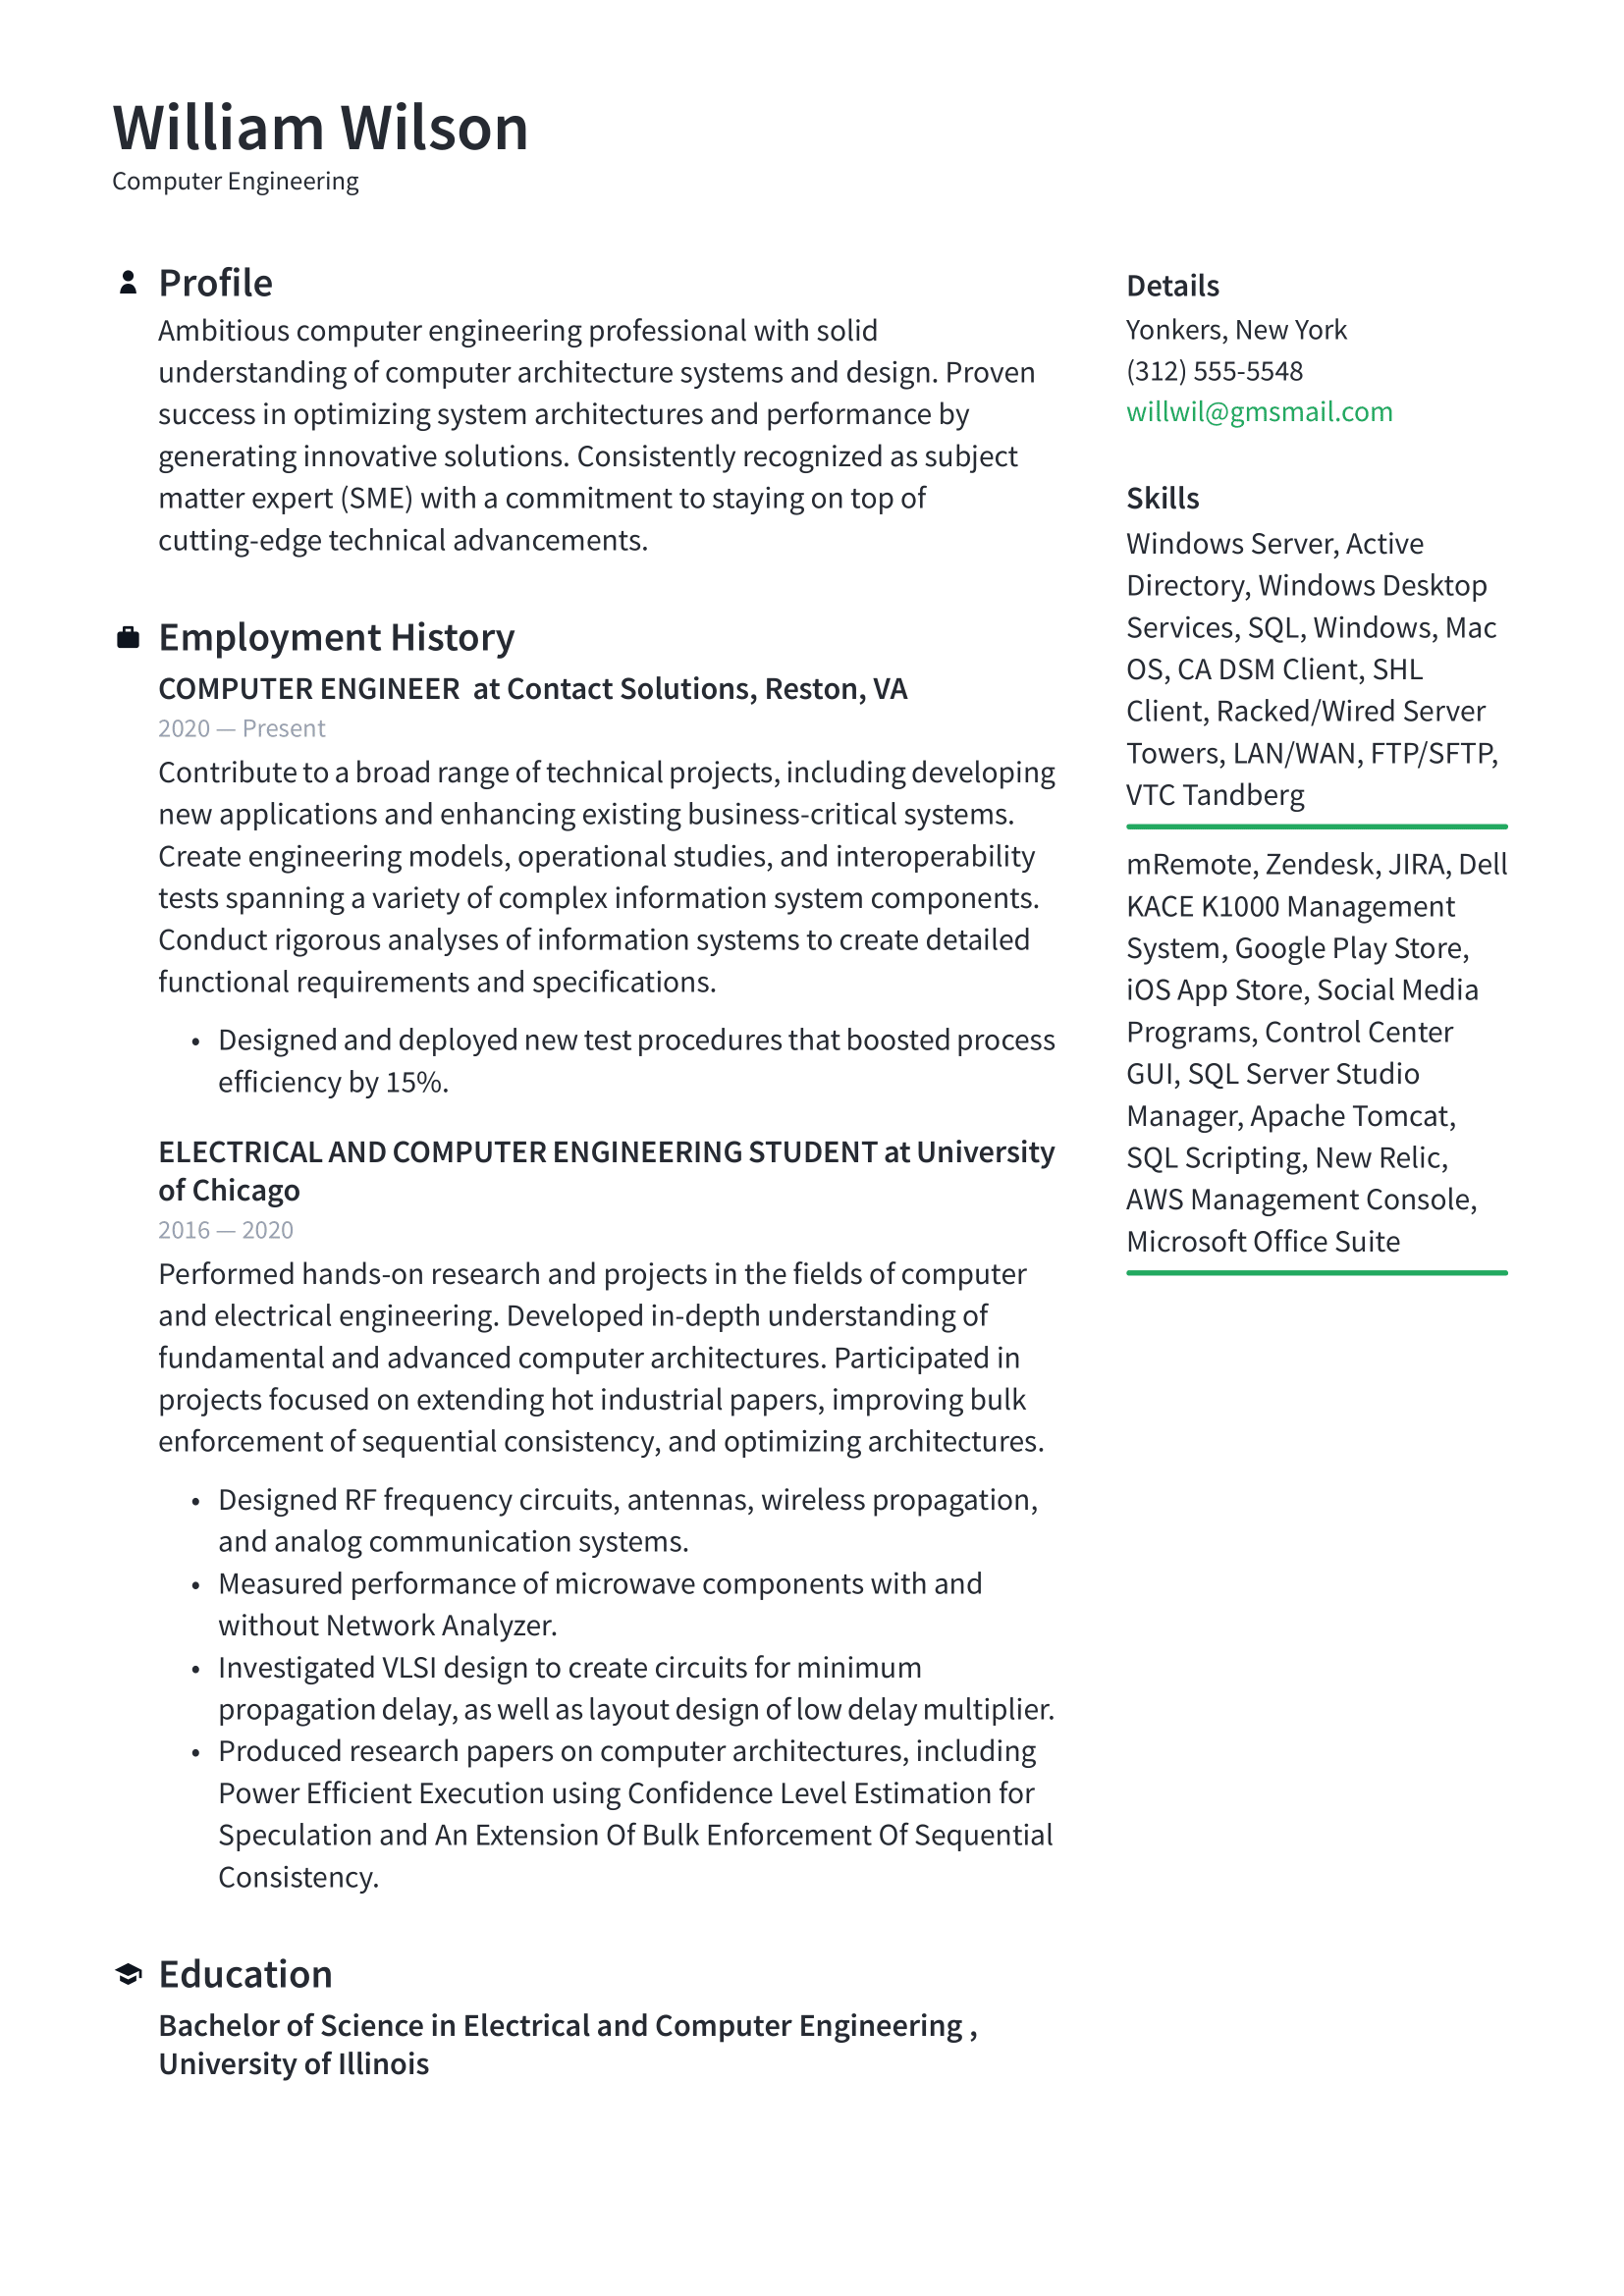 Computer Engineering Resume Example & Writing Guide